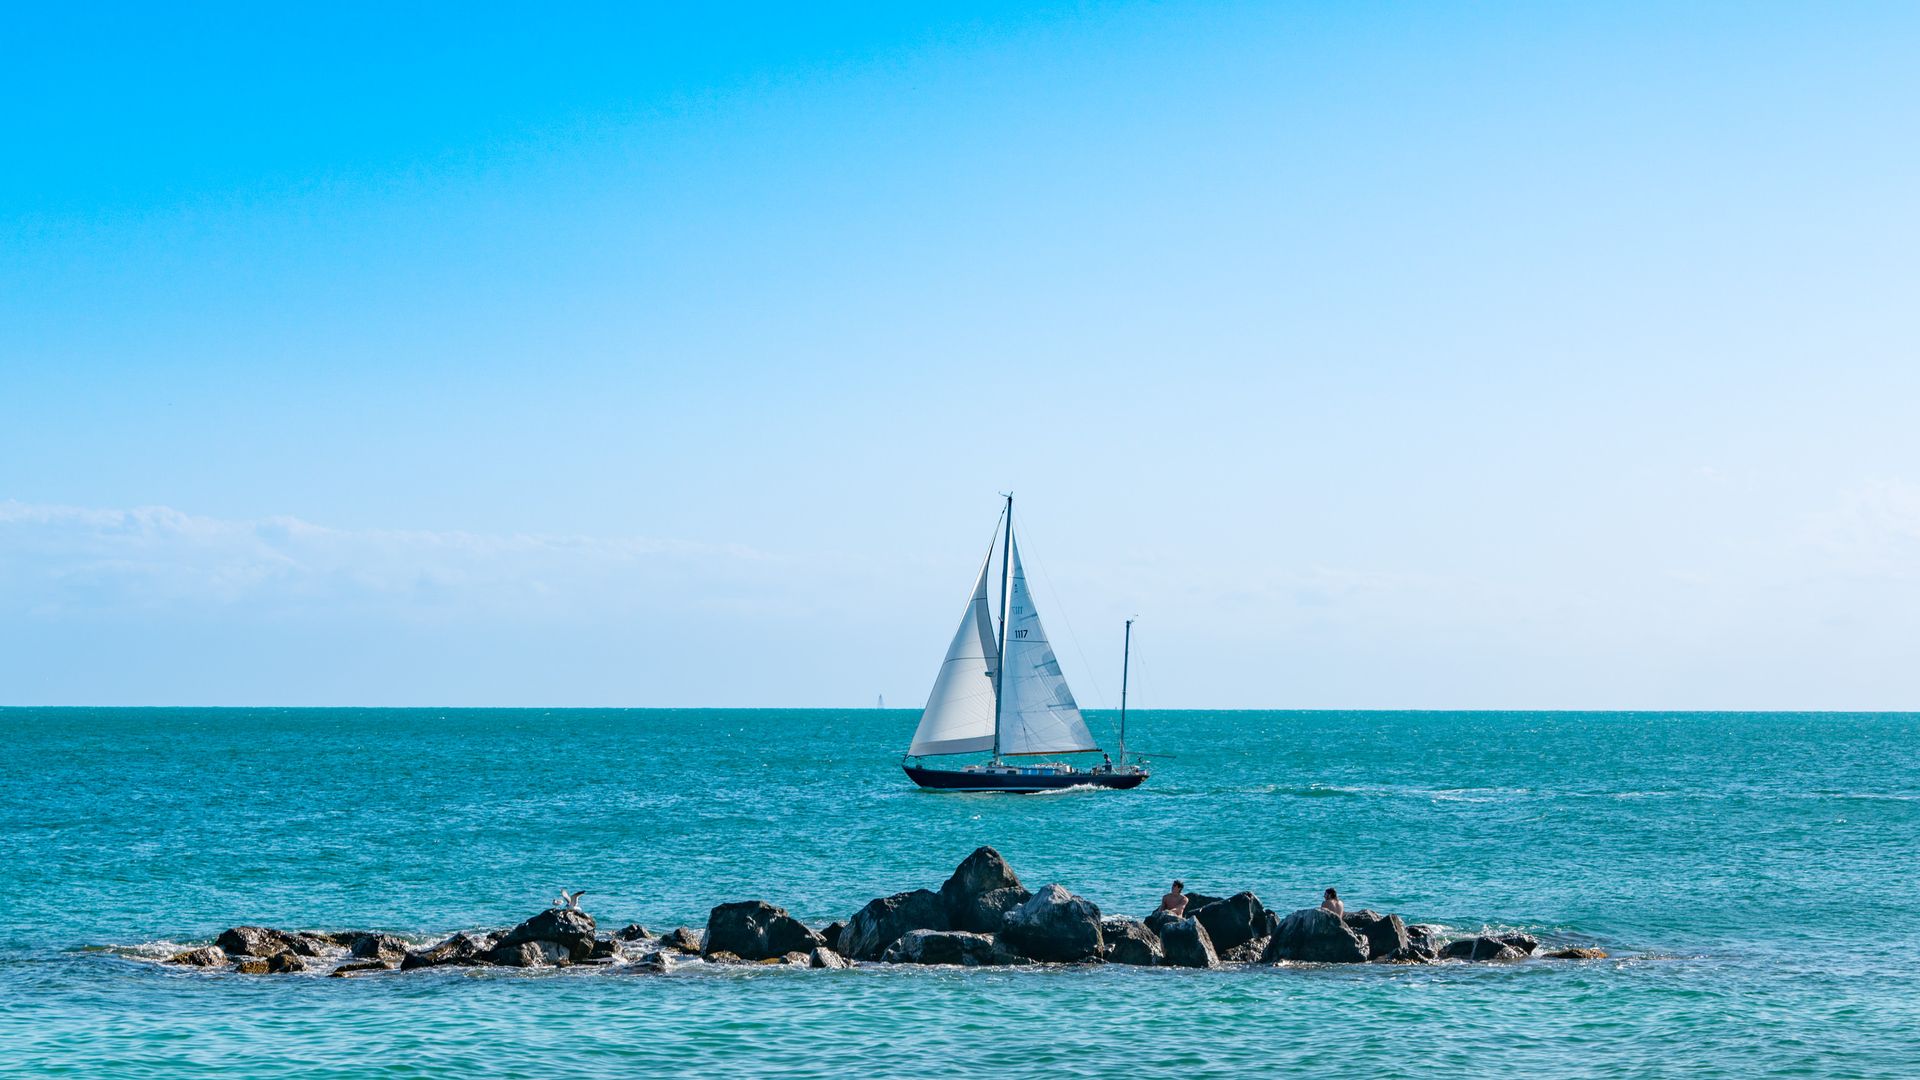 A sailboat with two full triangular sails in clear blue waters on a sunny day 